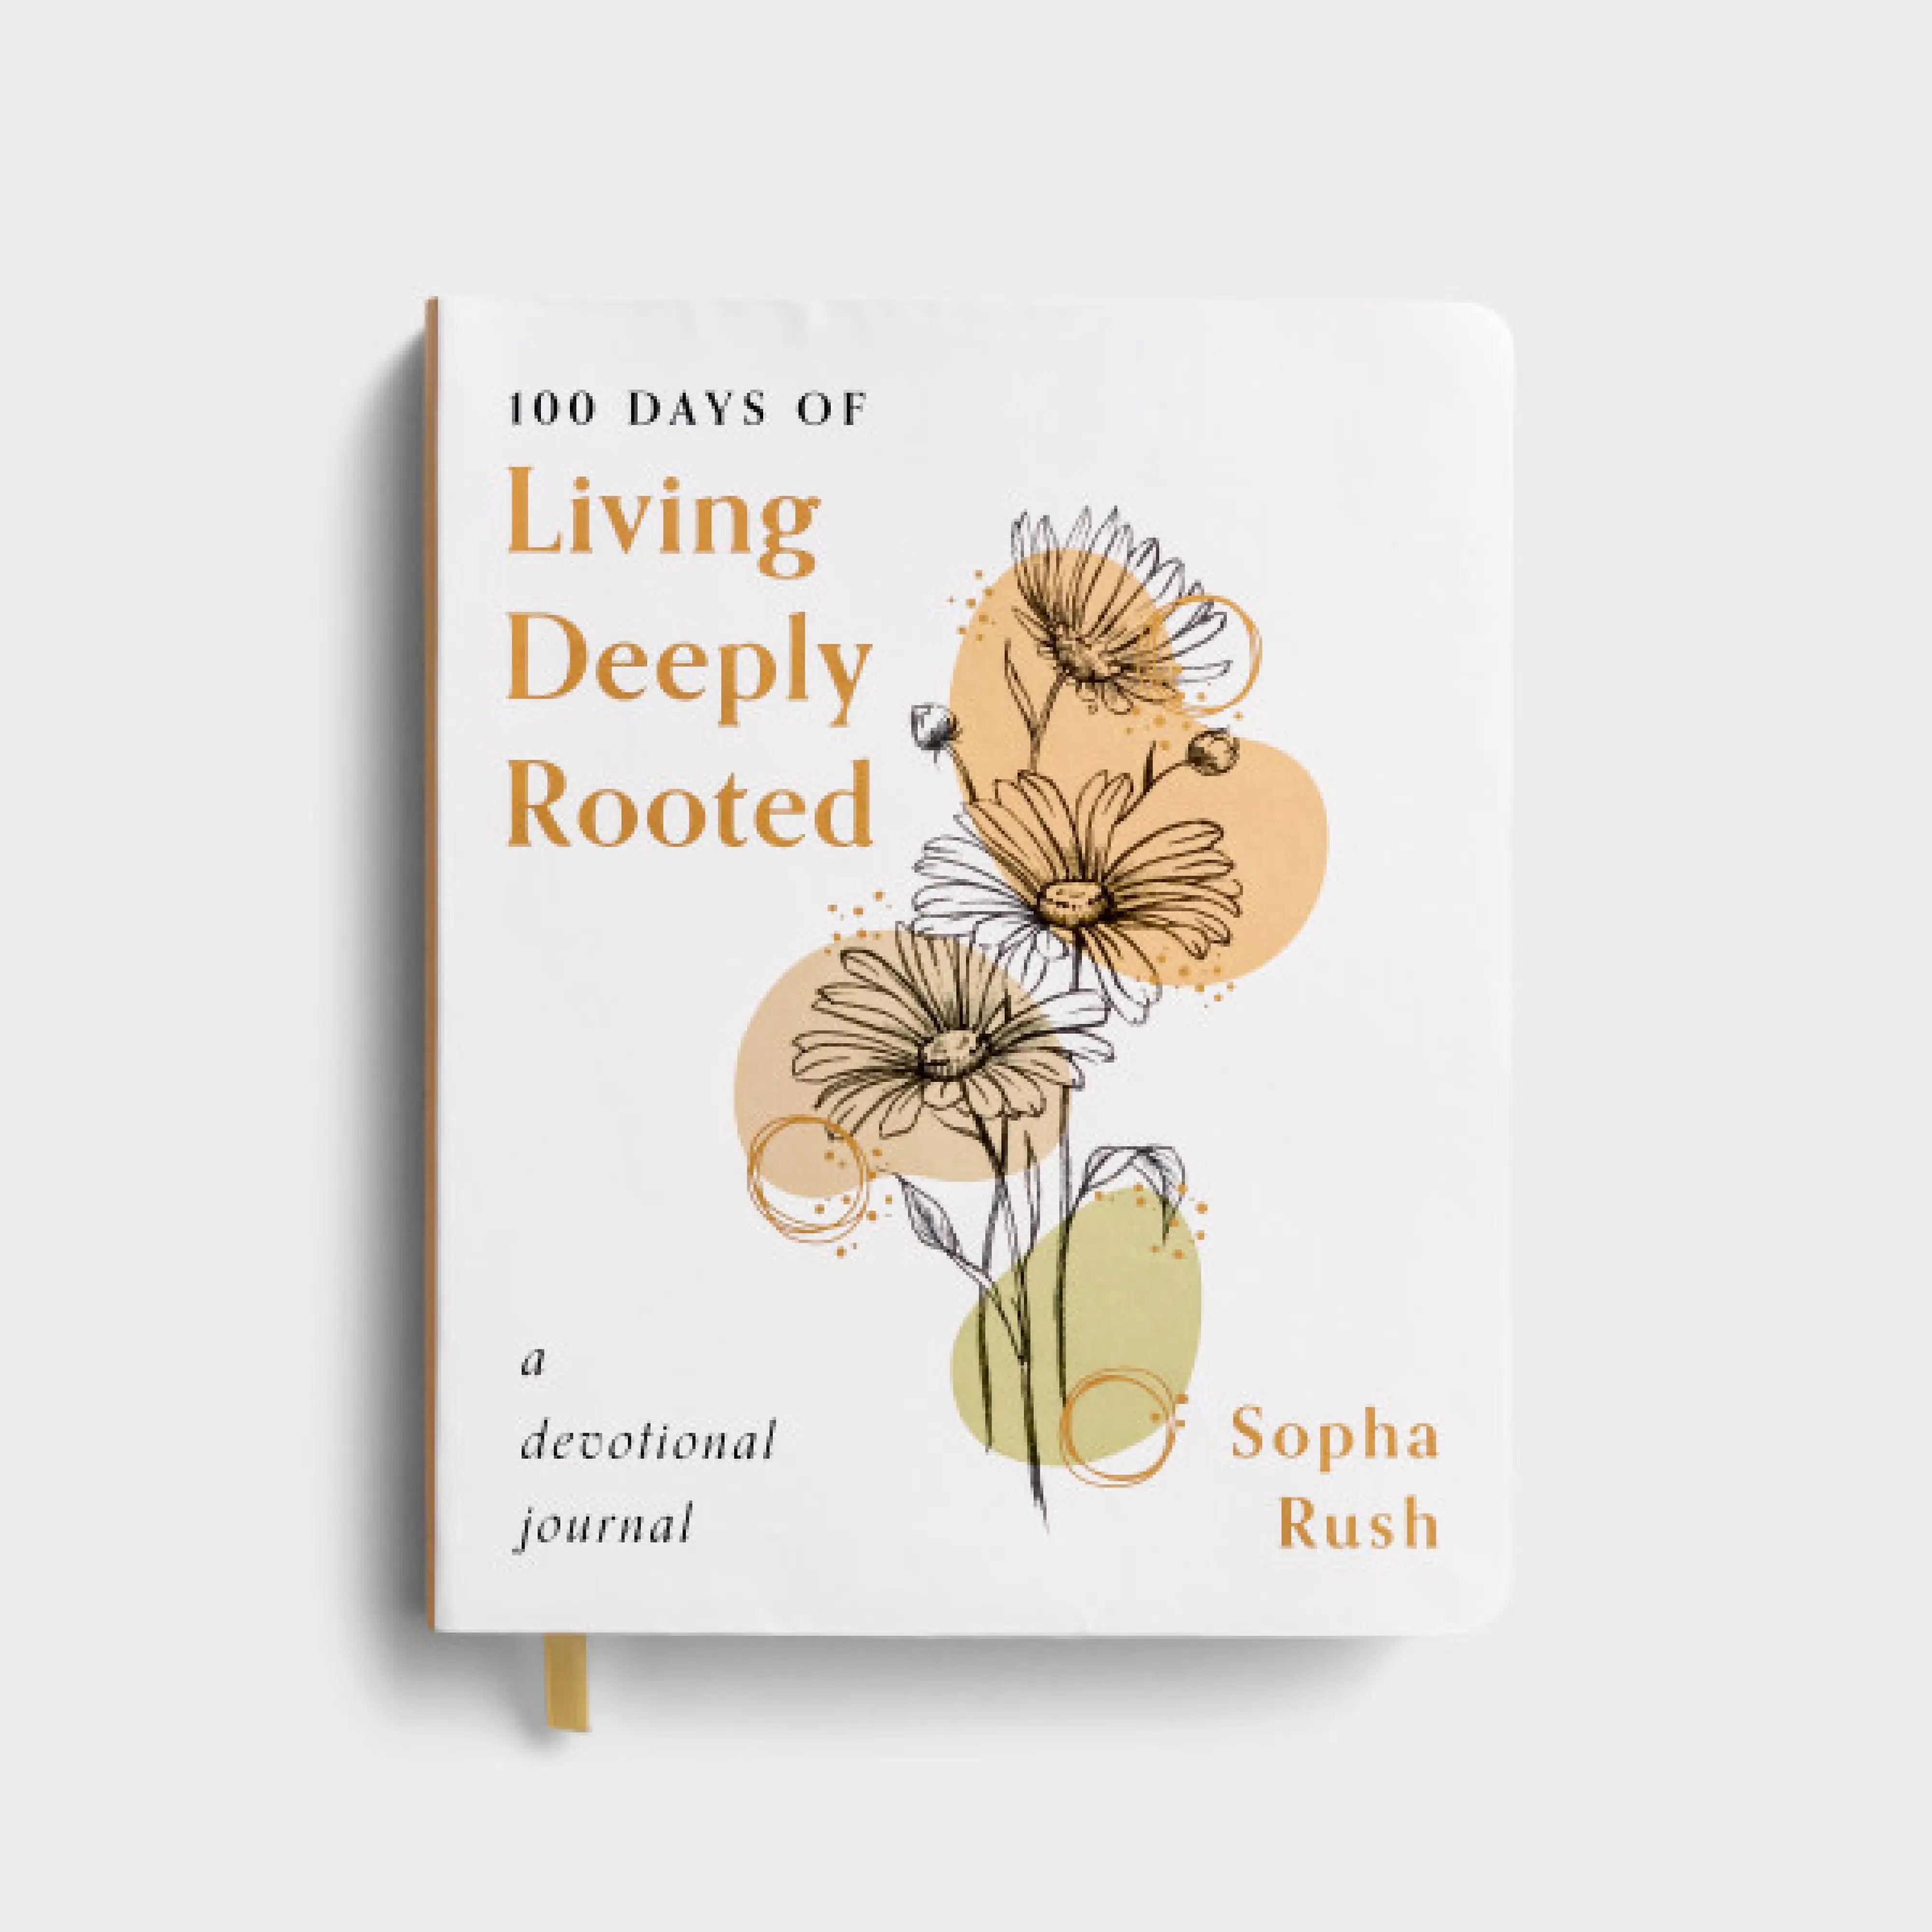 100 Days of Living Deeply Rooted